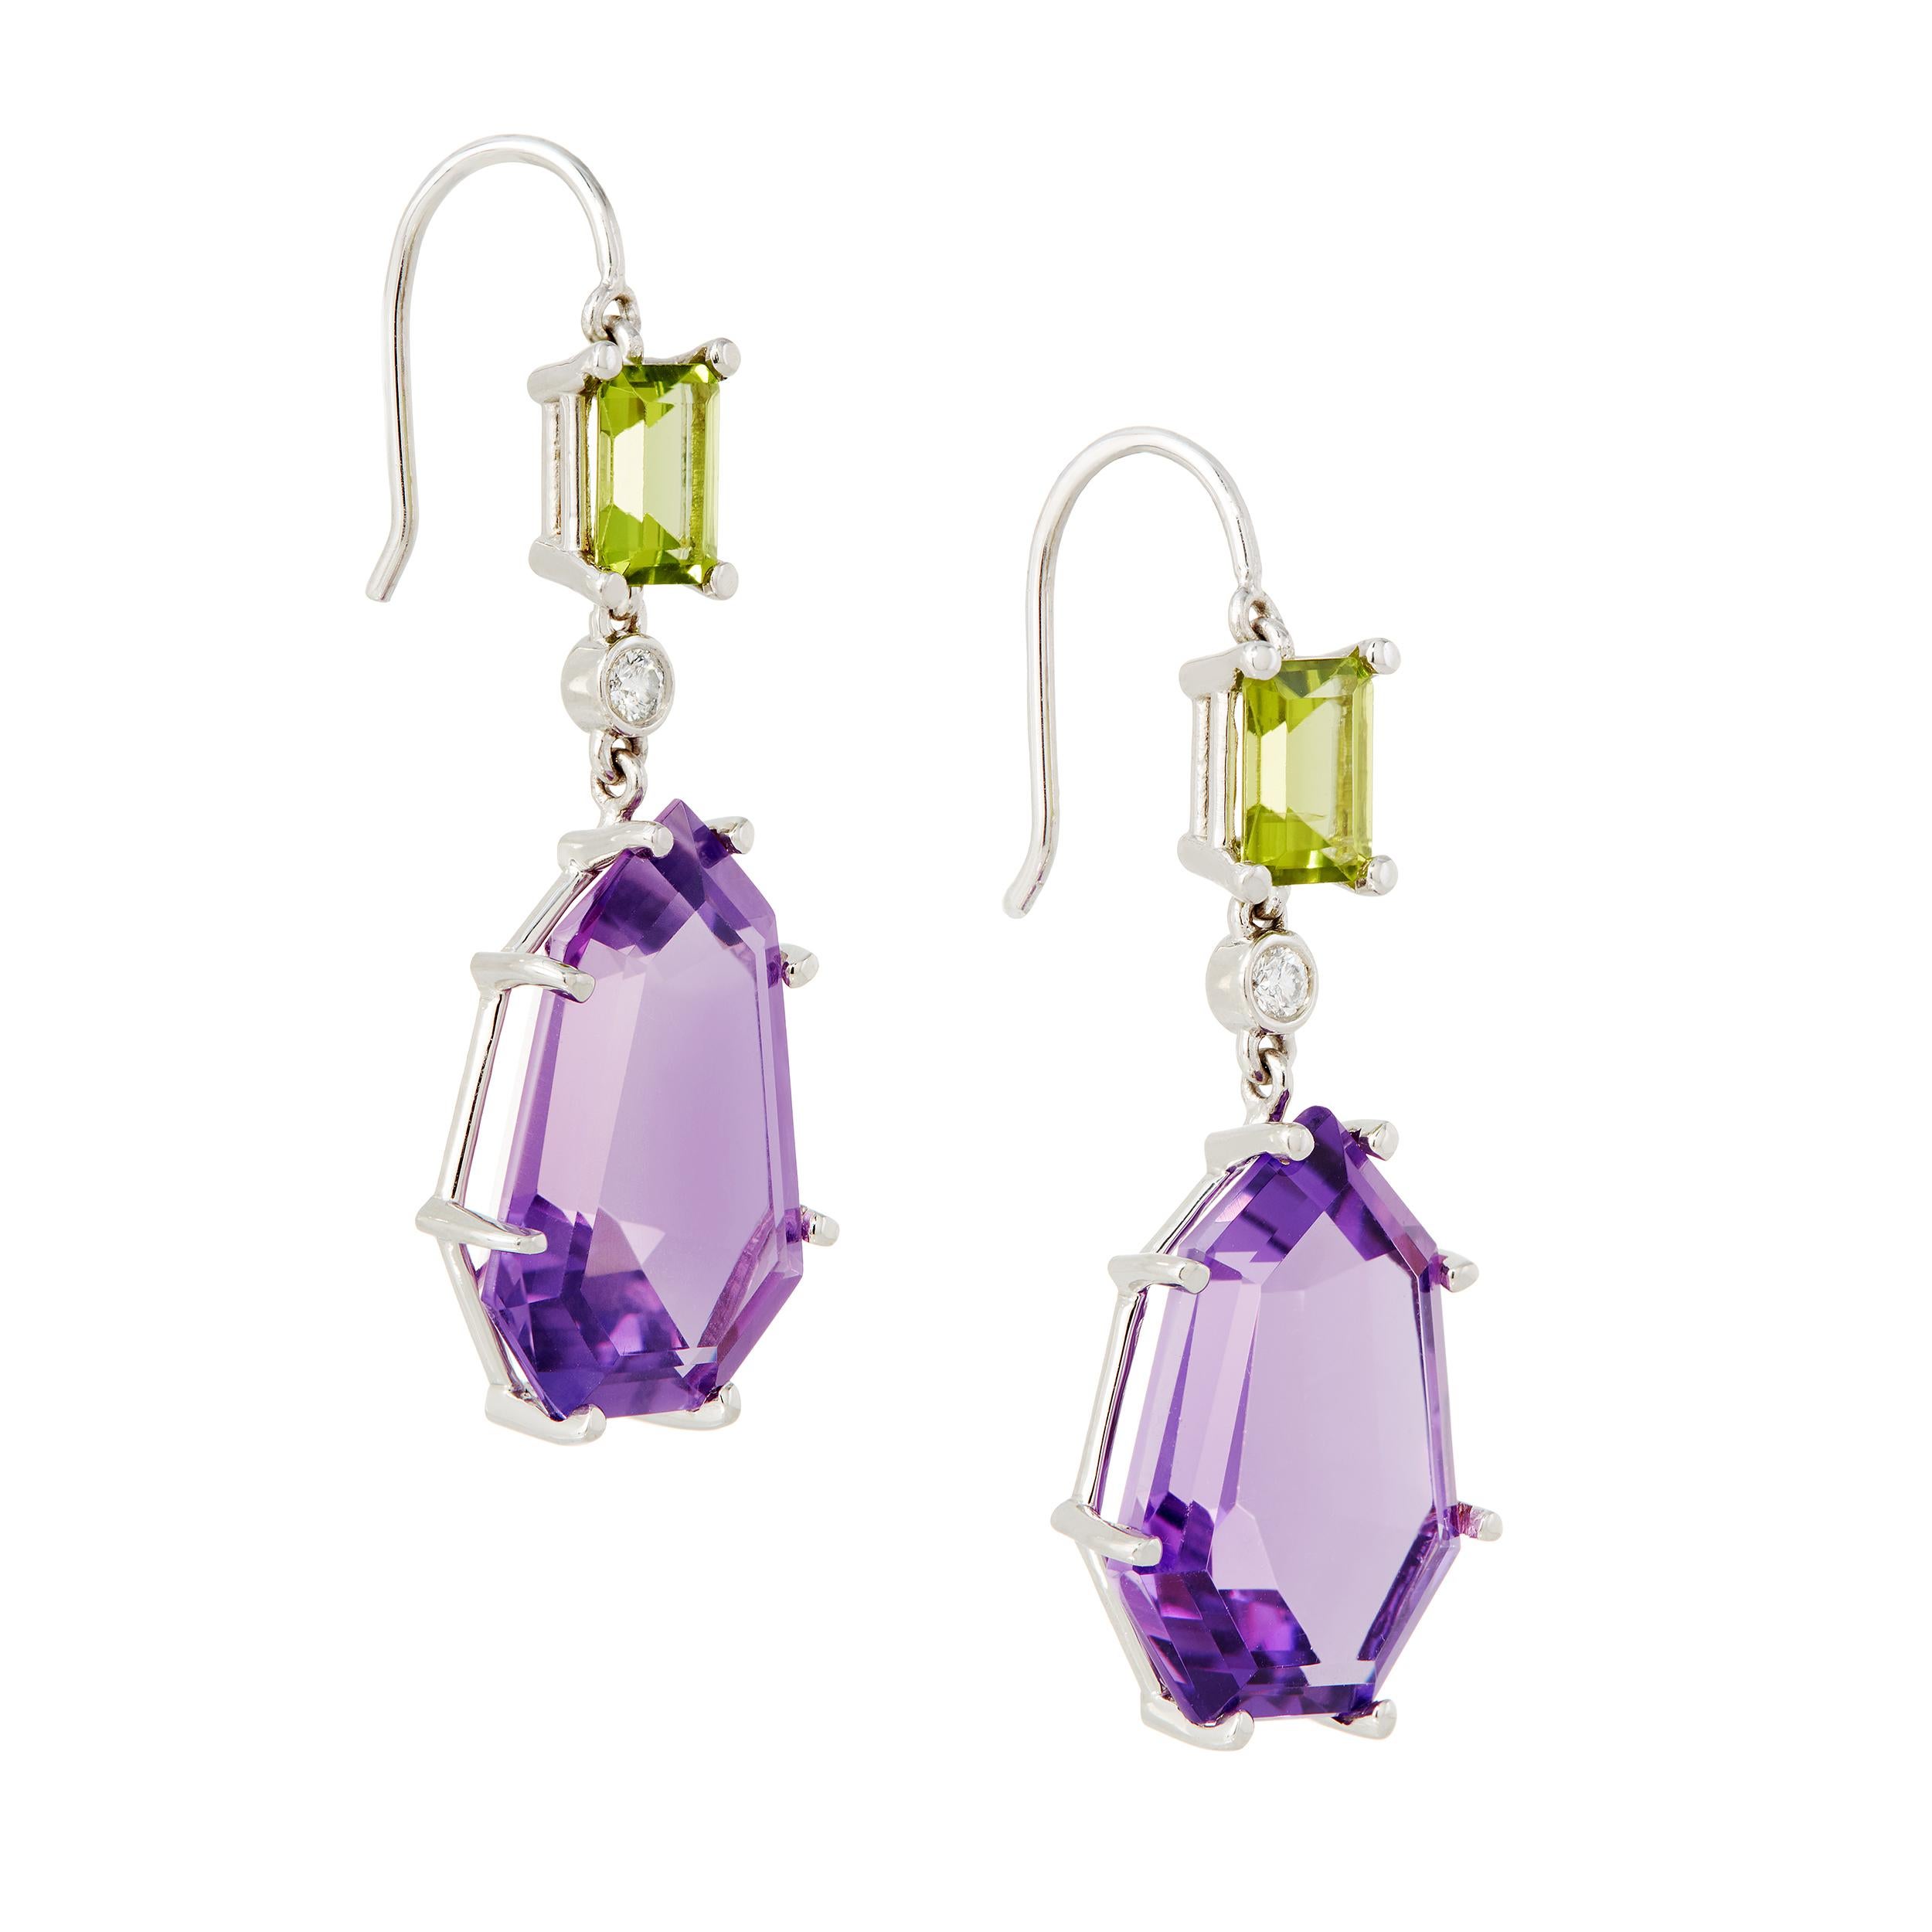 When discovered, Amethyst was believed to be the tears of Dionysus, the god of wine and revery.  Perfect for these fun earrings! This a custom fancy shape of Amethyst making this one of a kind design all the more unique.

Gemstone Details
    